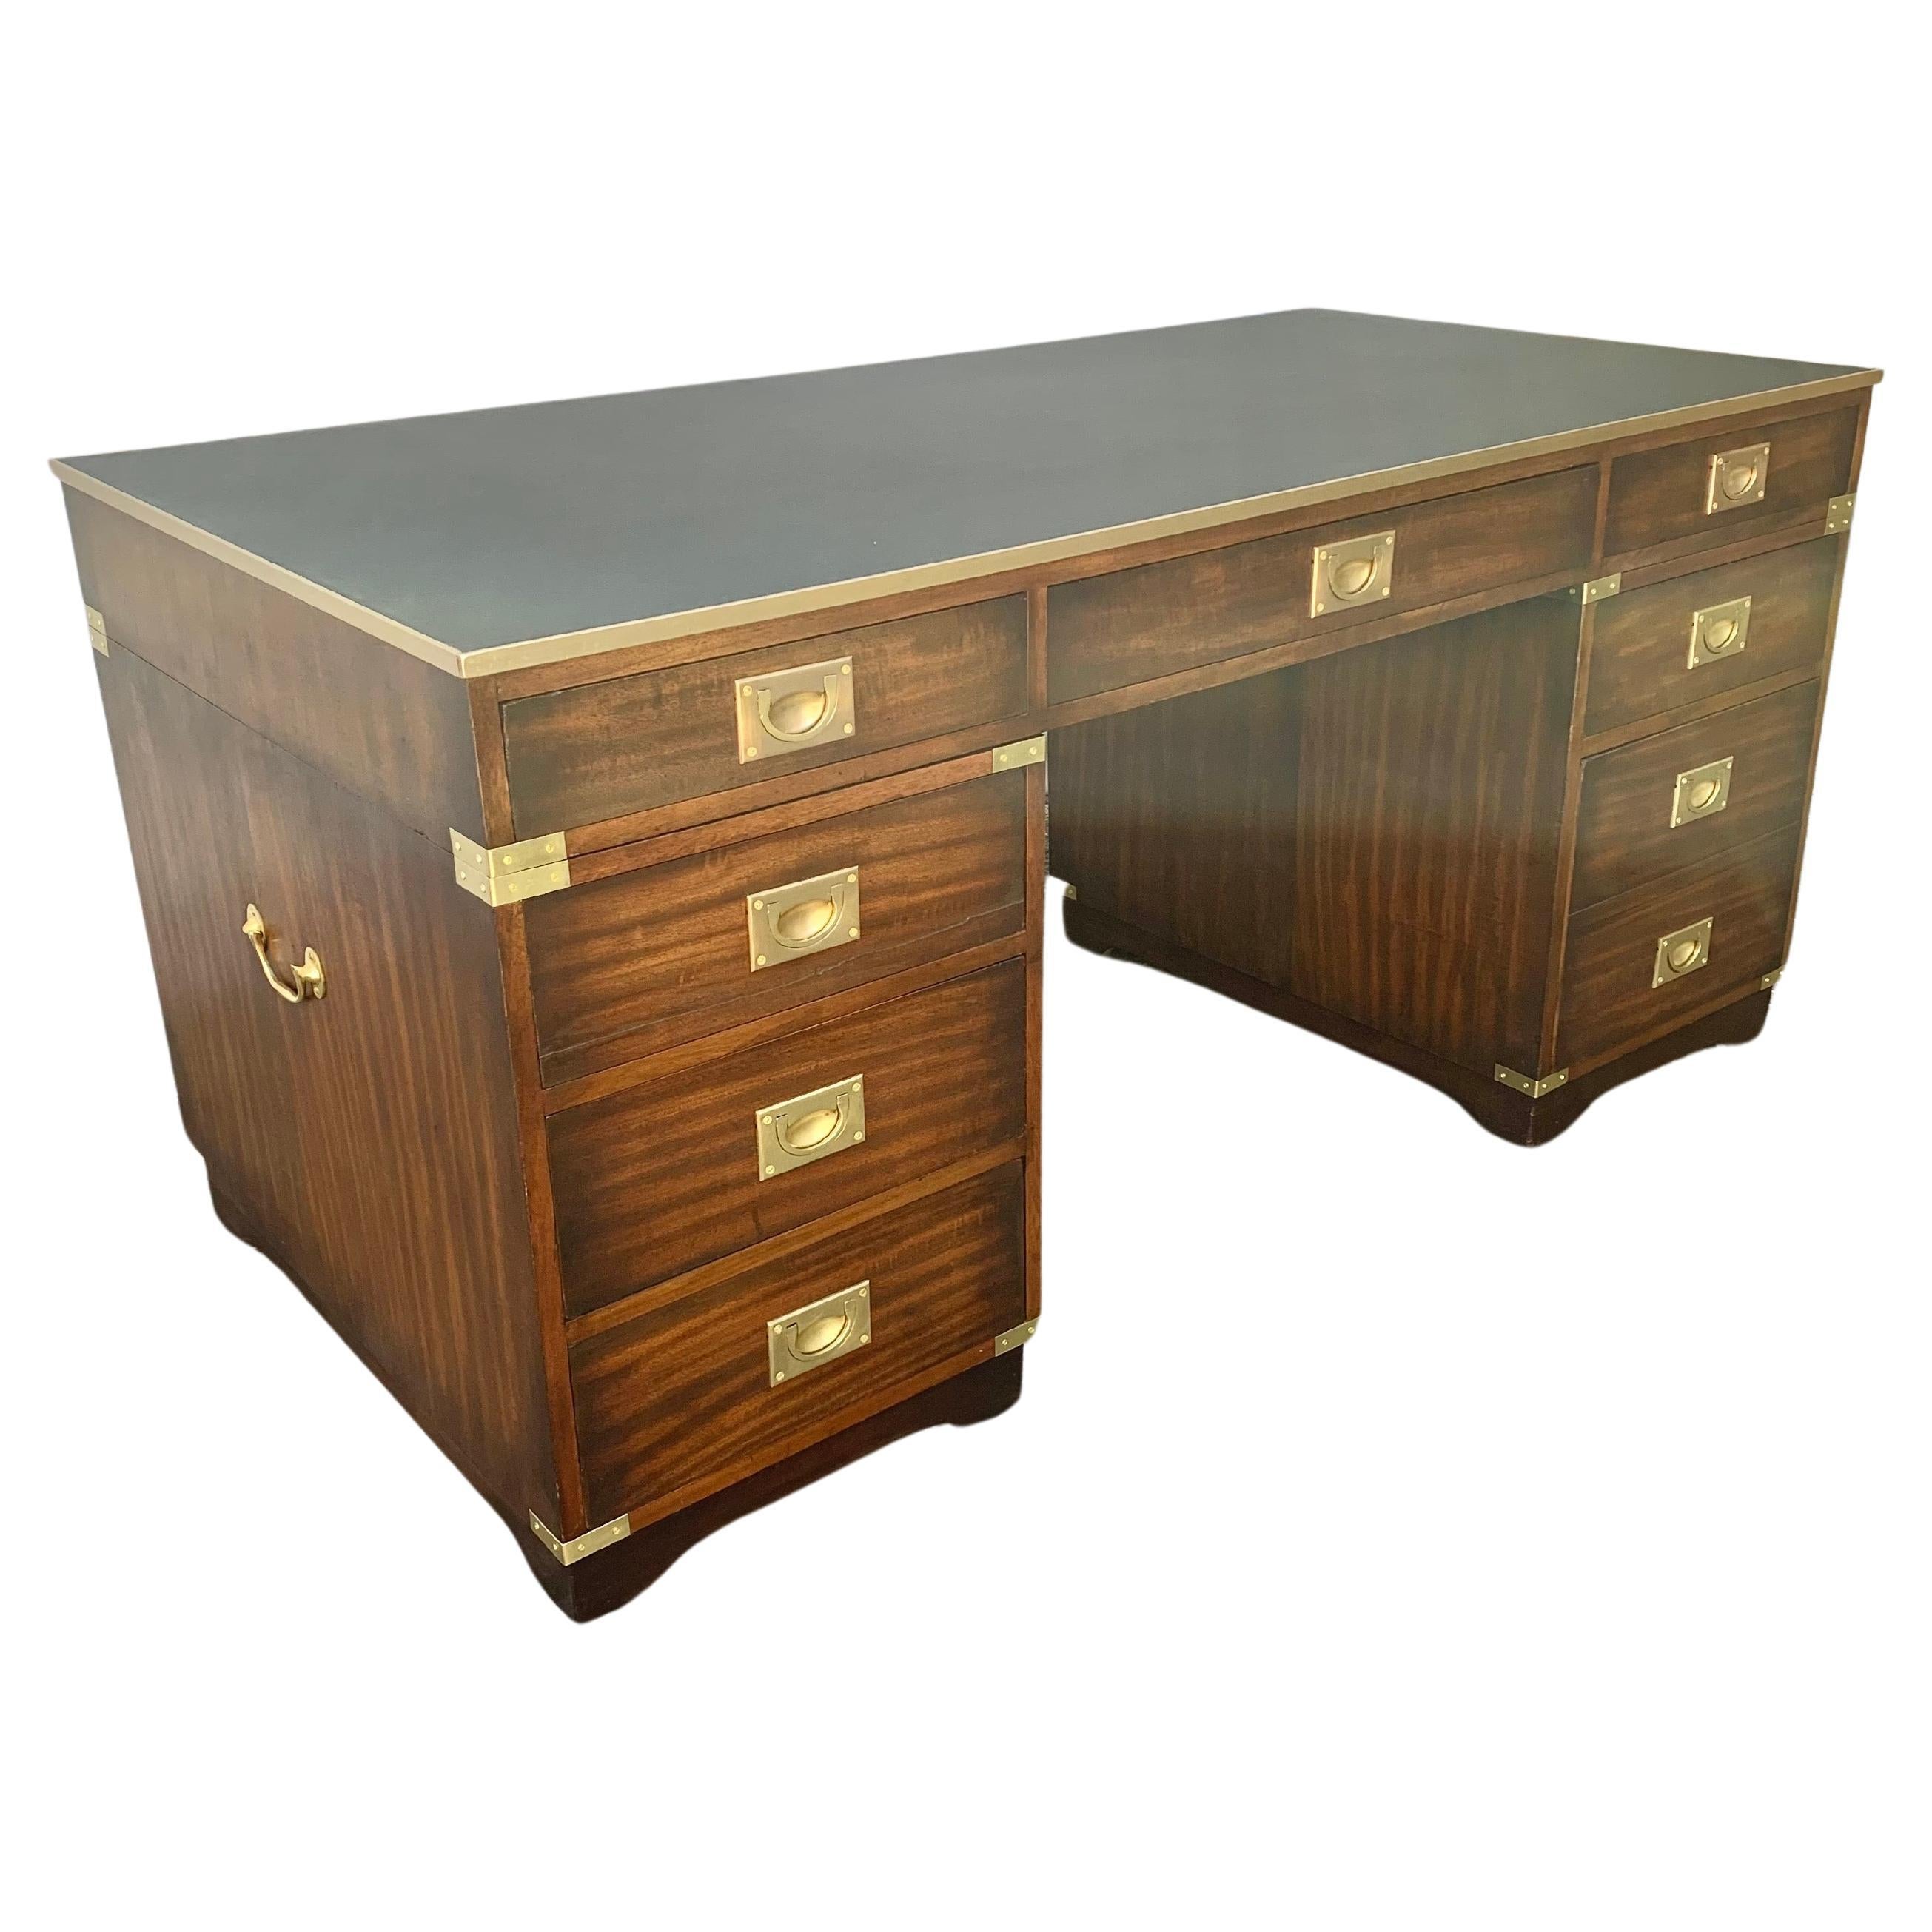 This Antique English Campaign Desk was crafted by artisans from walnut in the early 20th Century. The desk features a brass banded black leather top consisting of three drawers that rest on two sets of pedestal drawers, one being a double drawer.